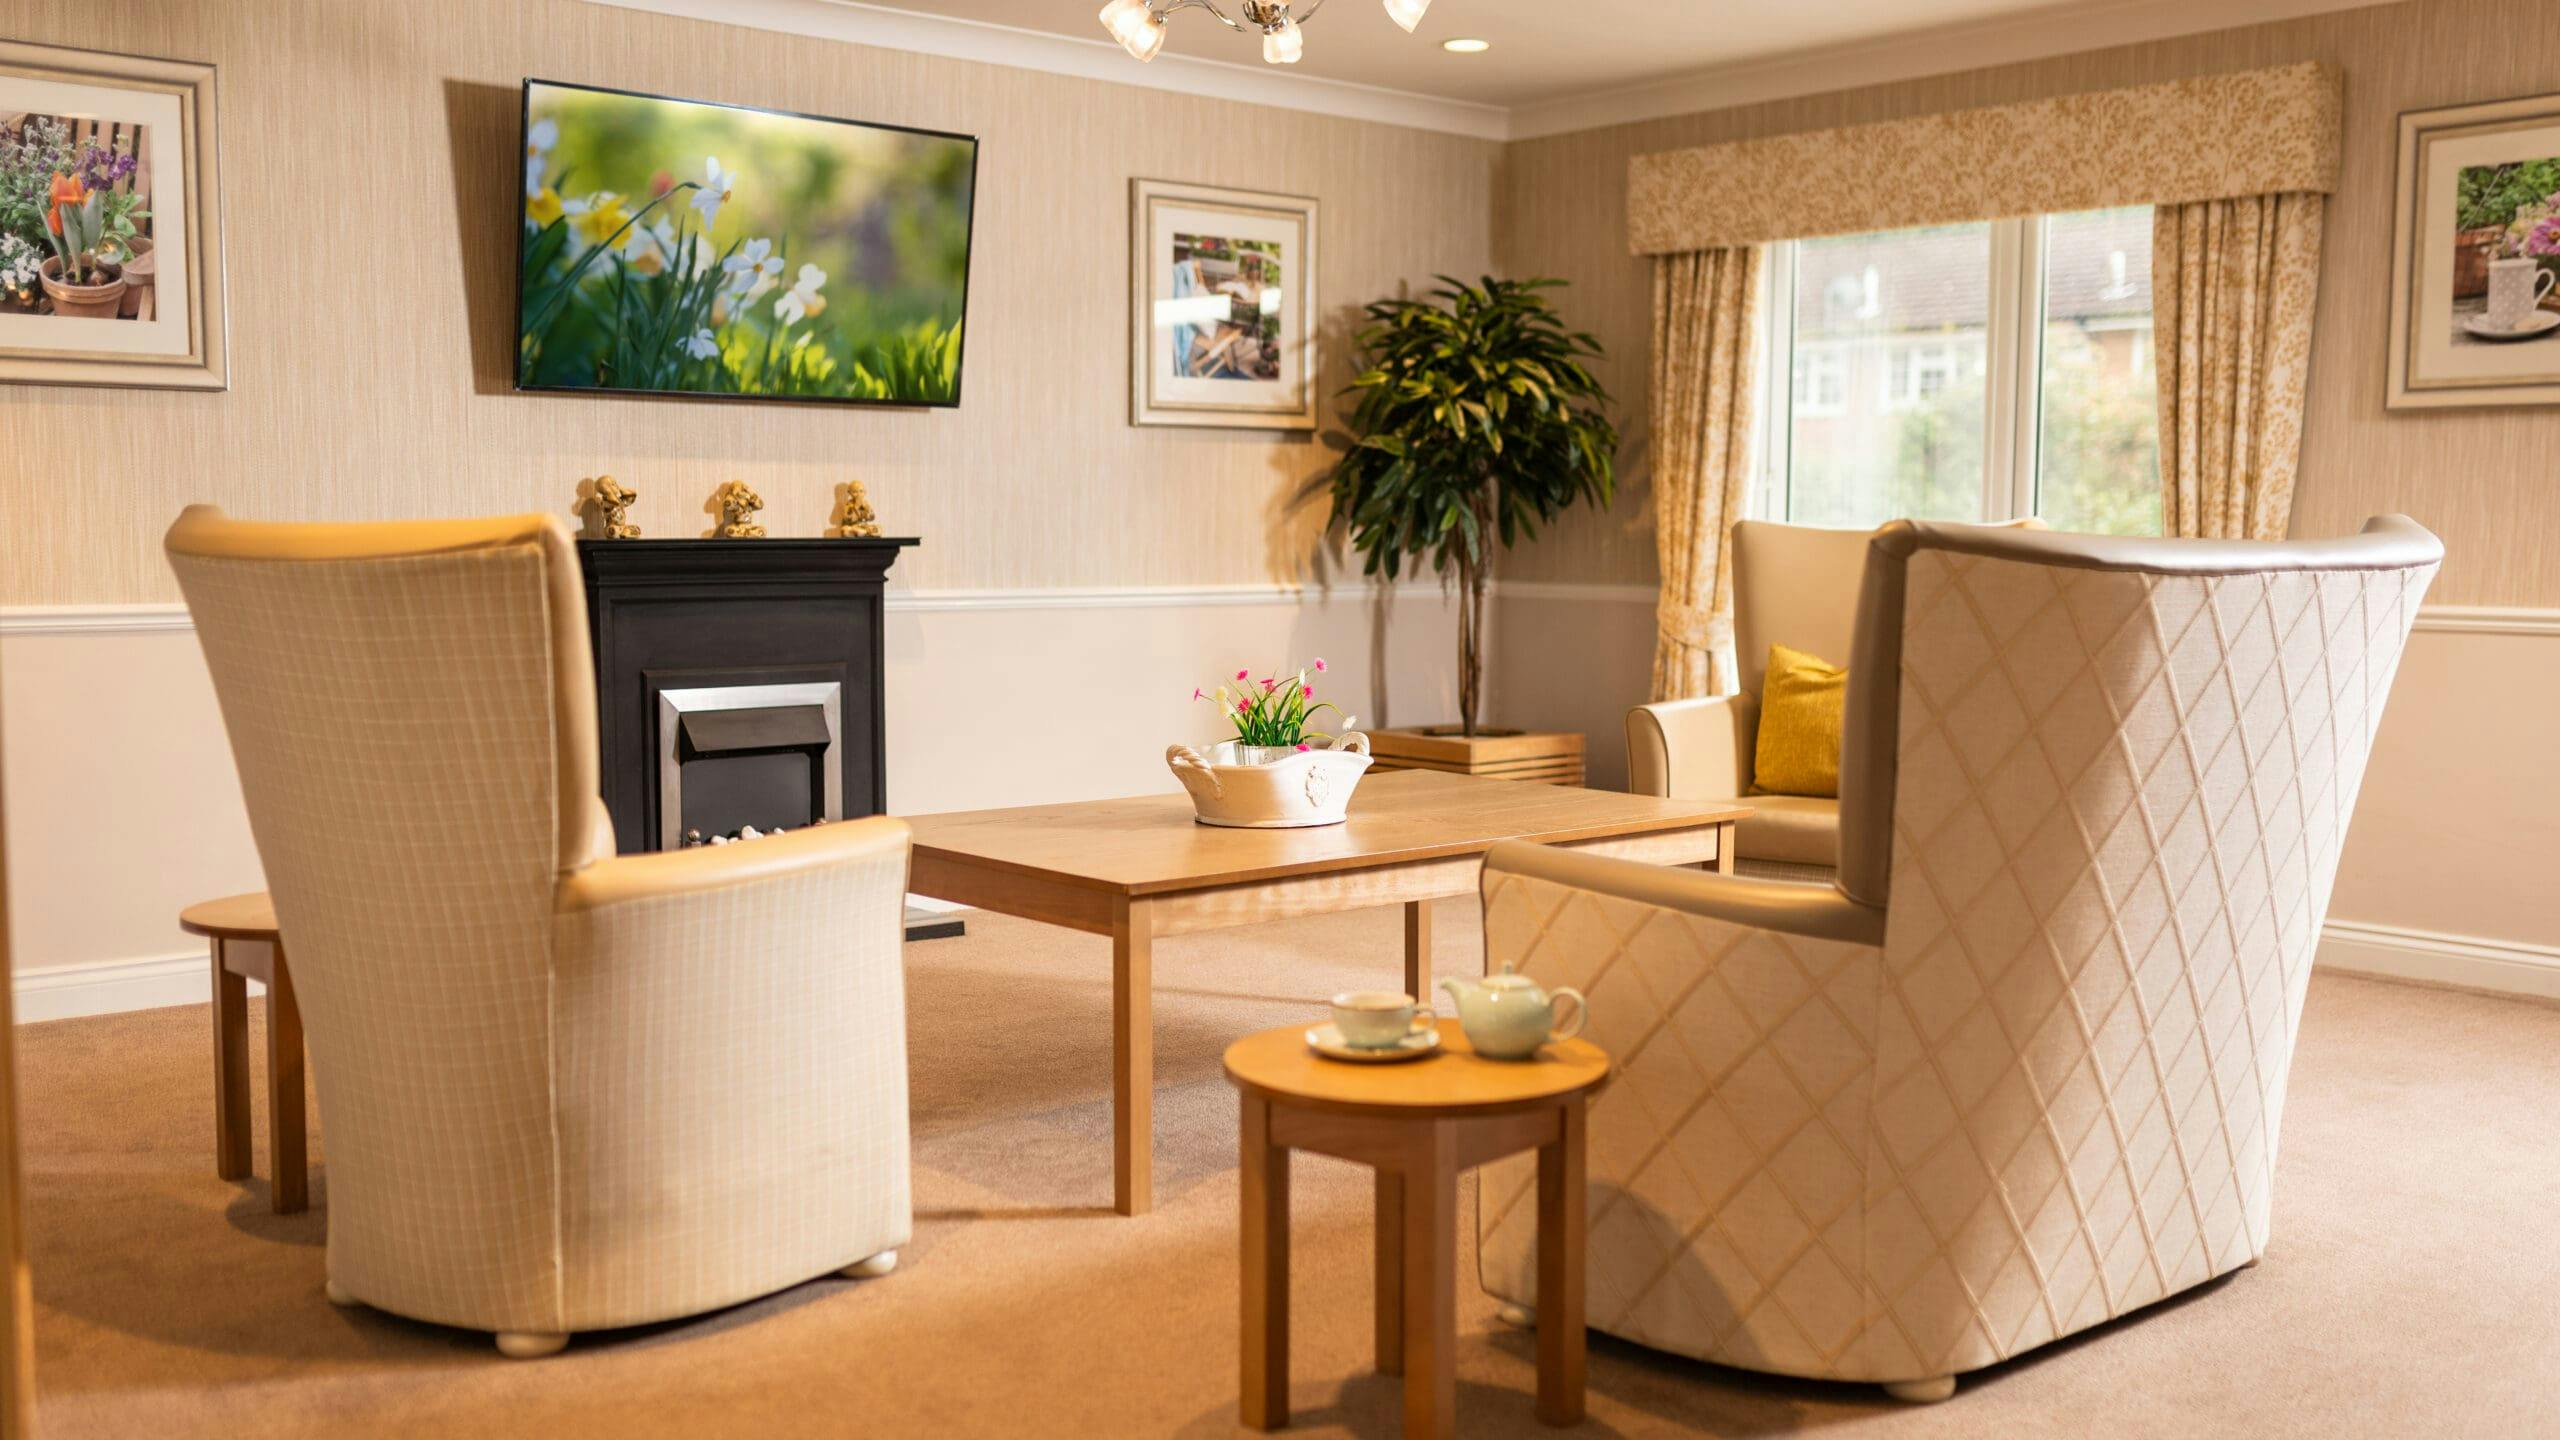 Aria Care - Belmont House care home 003